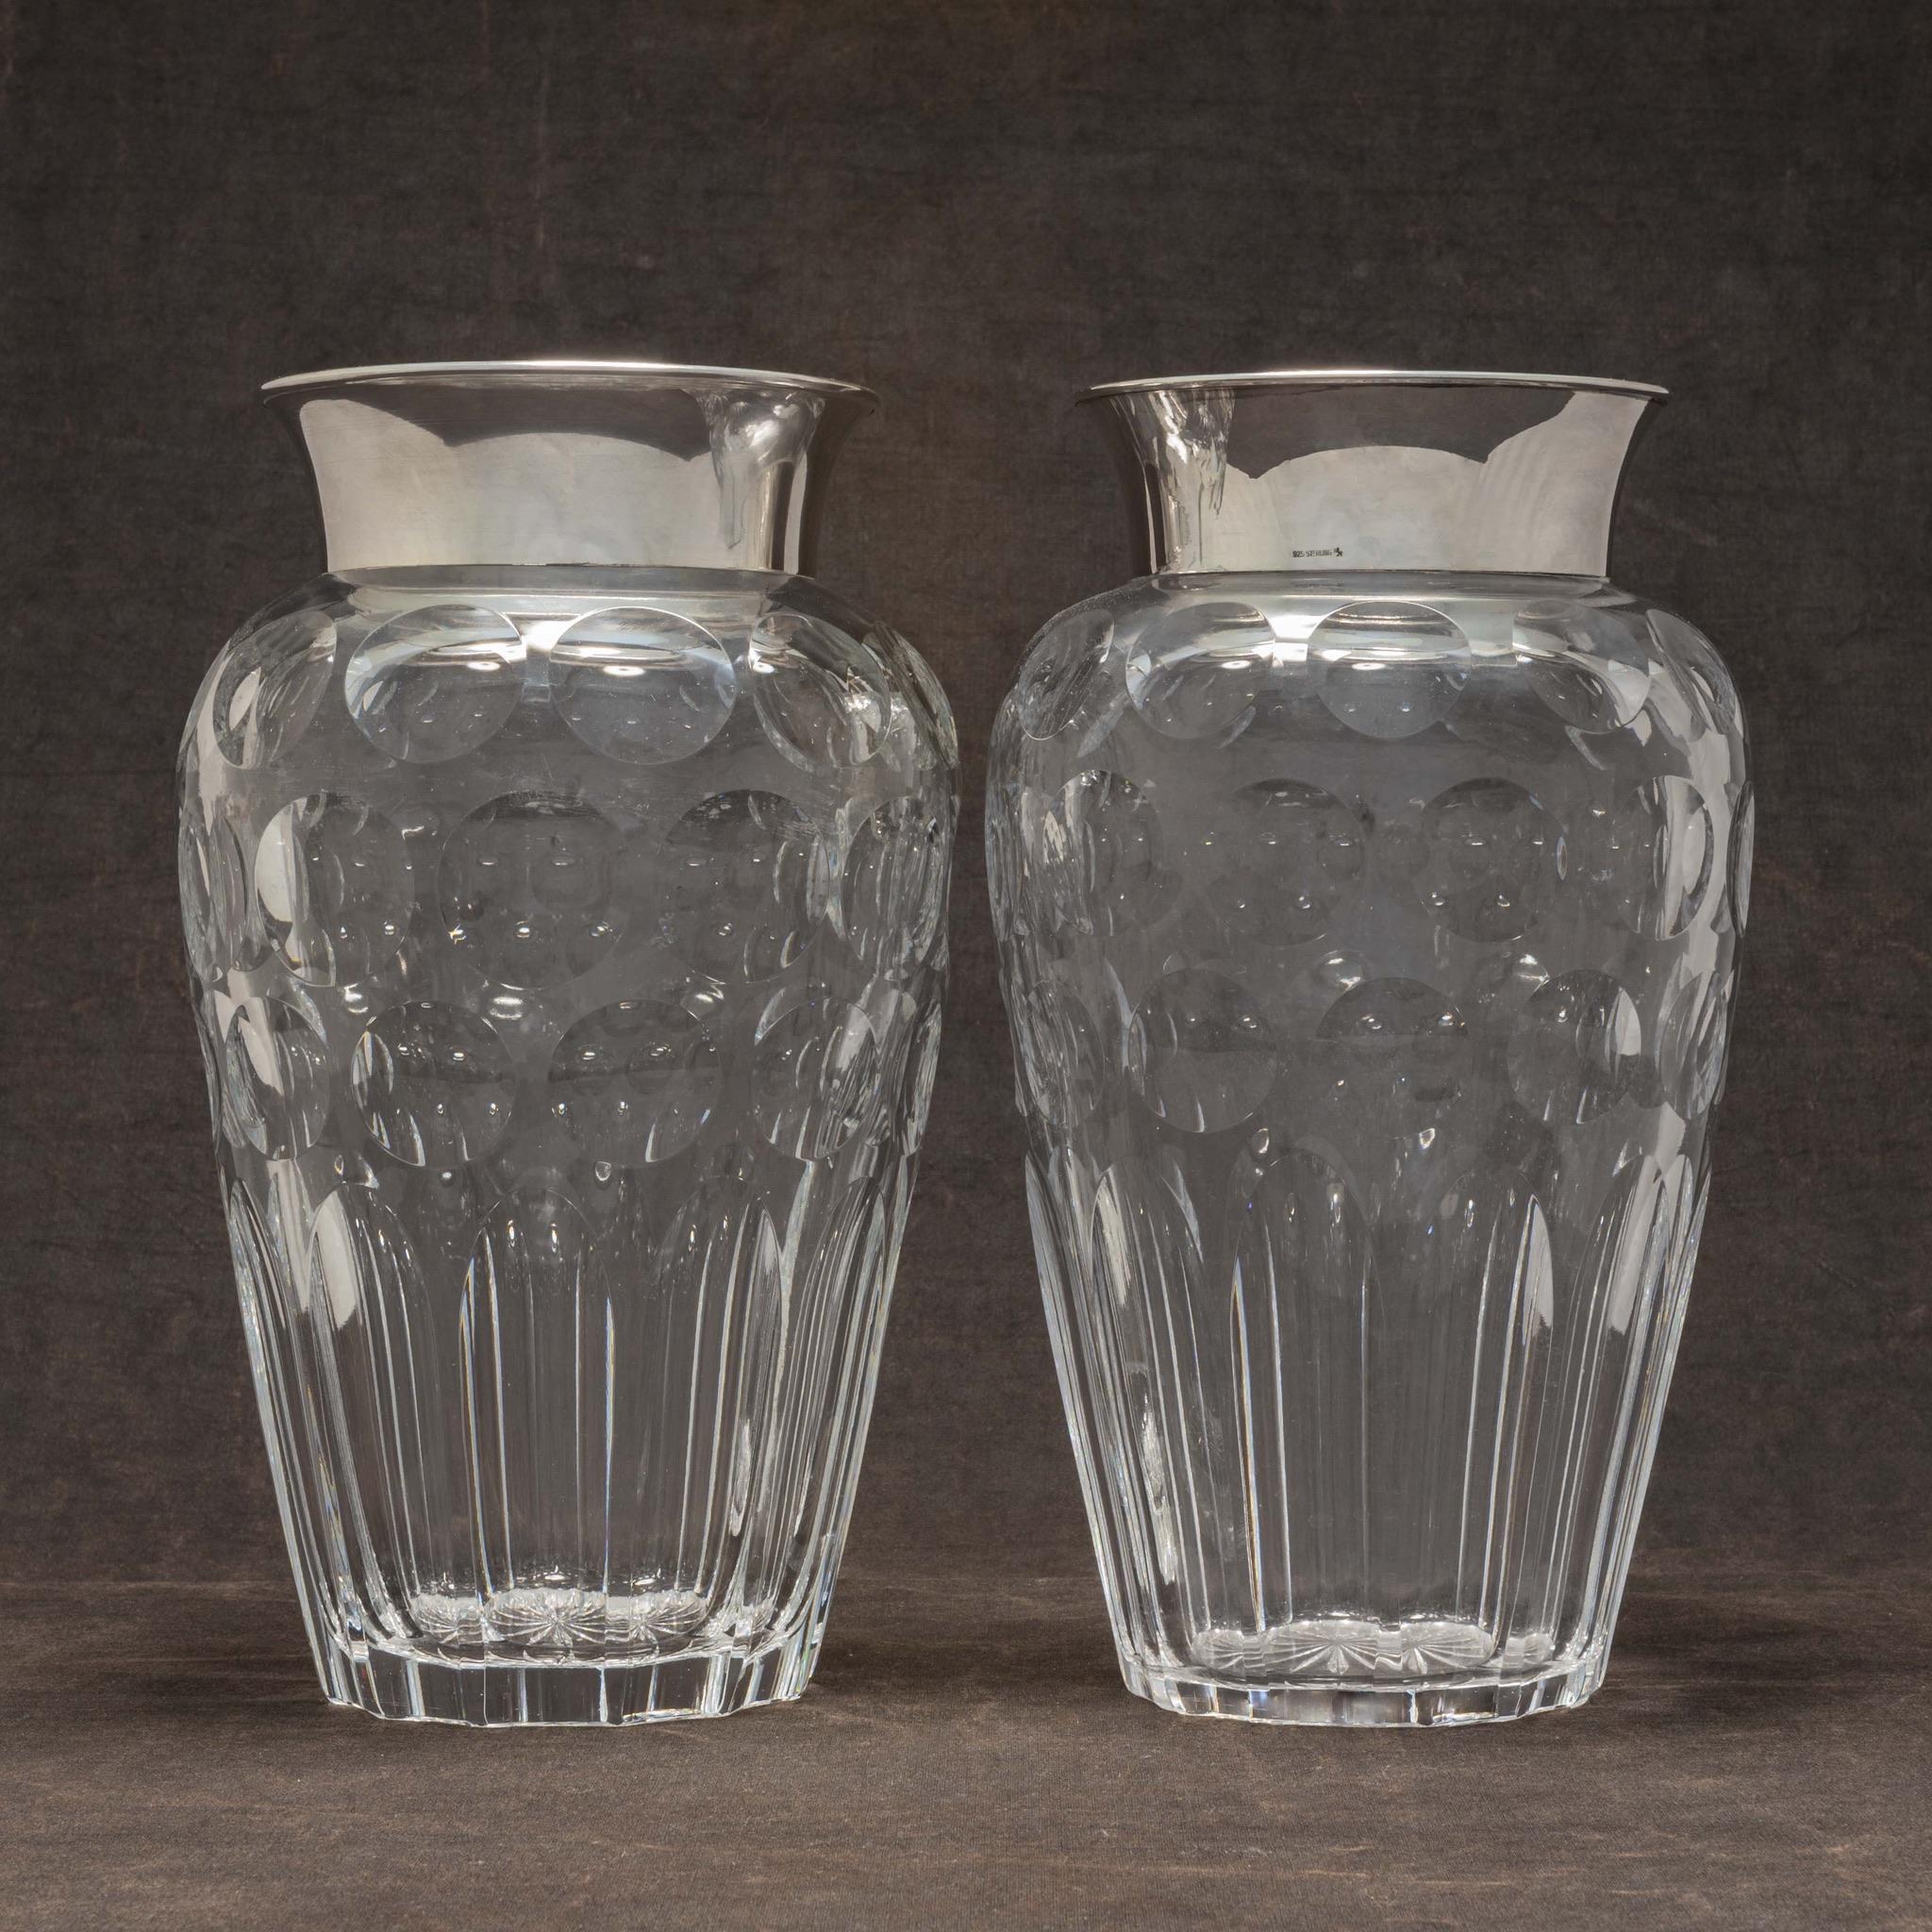 Mid-Century Modern Superb Pair of Large Cut Glass Vases with Silver Collars, circa 1960s